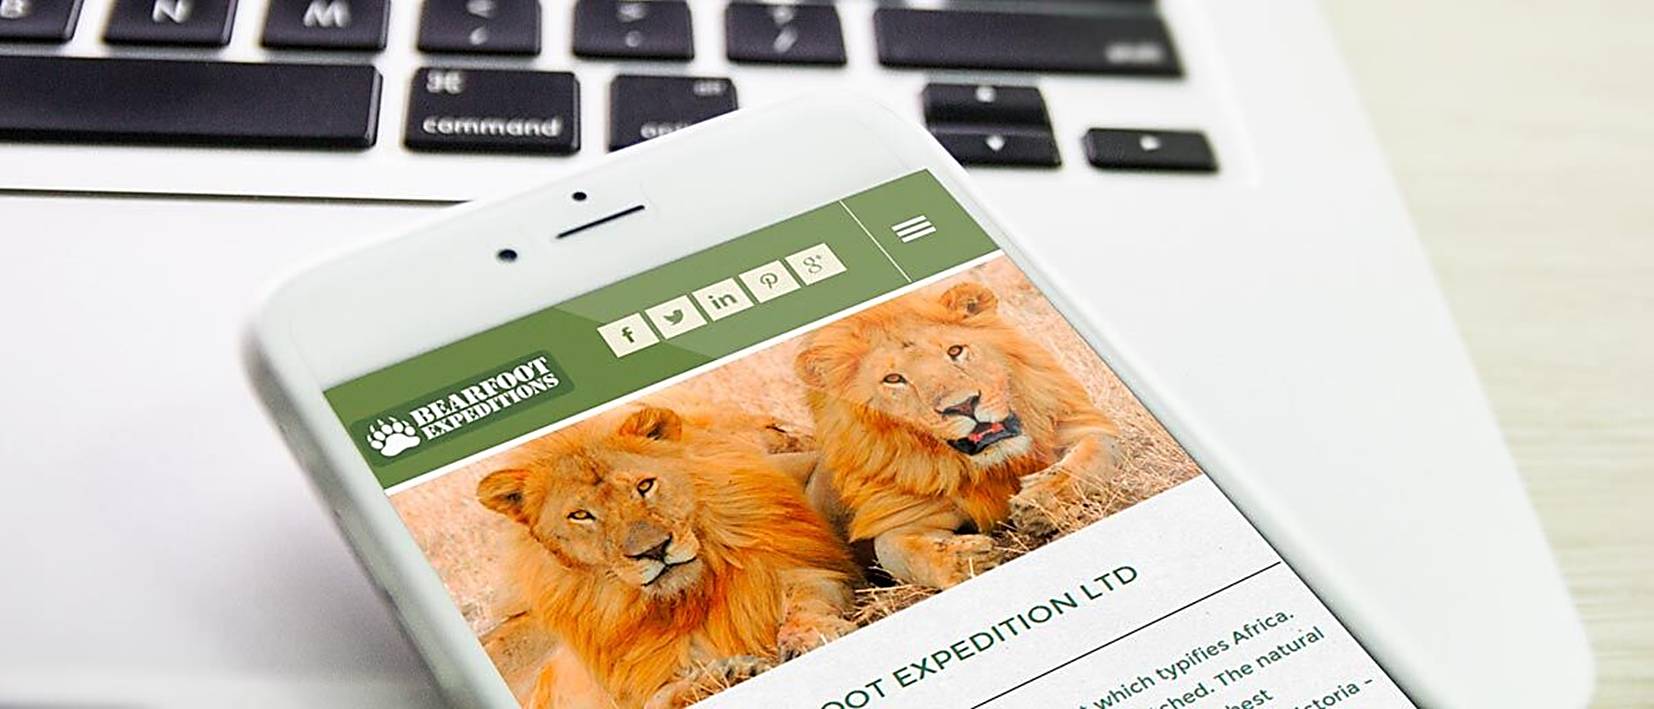 keyboard, mobile phone, lions